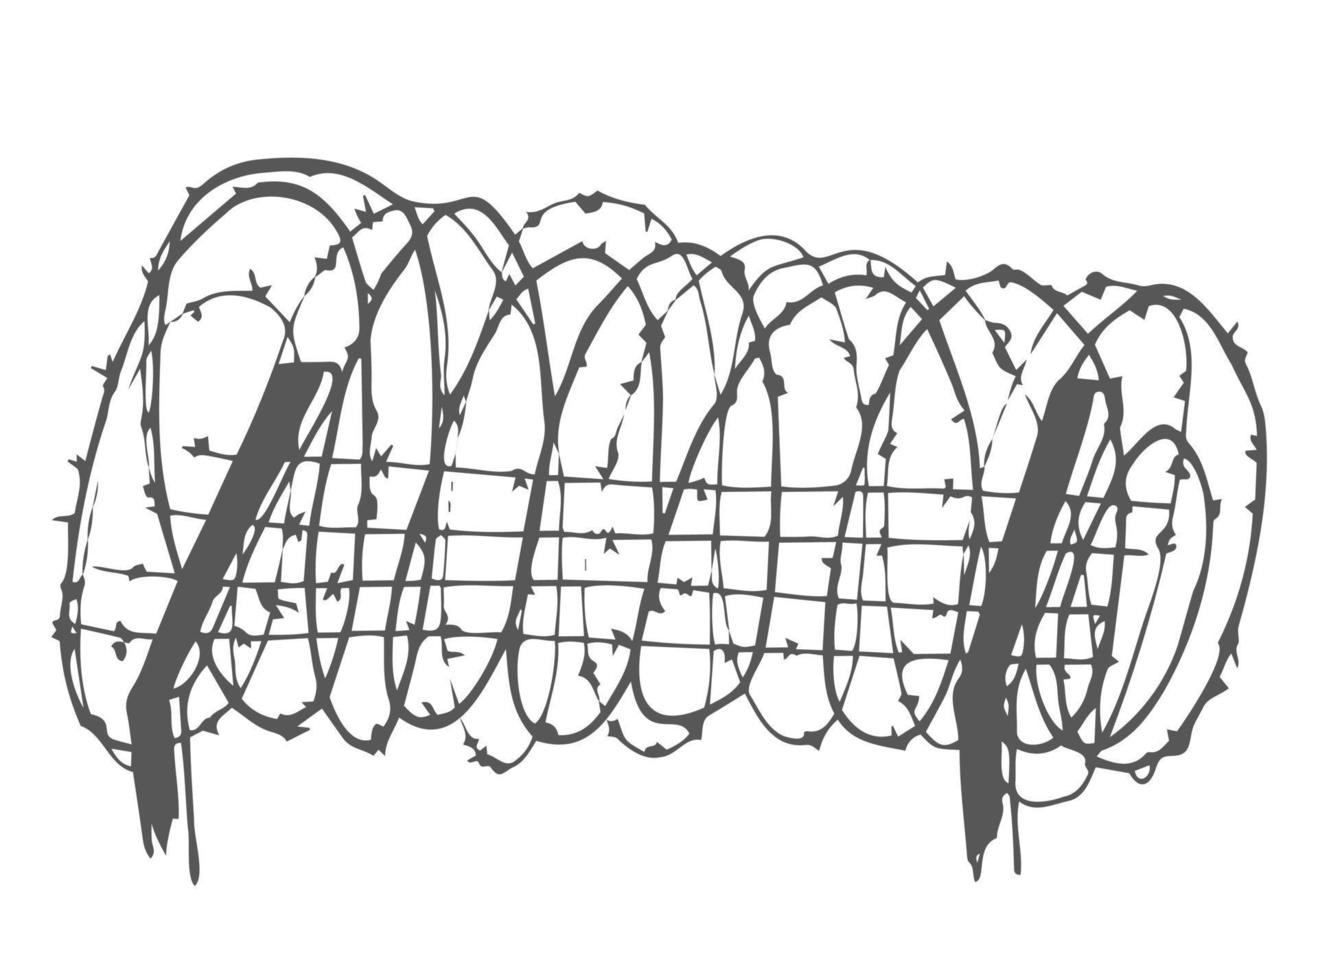 Metal steel barbed spiral wire with thorns or spikes realistic vector illustration isolated on transparent background with shadow. Fencing or barrier doodle element